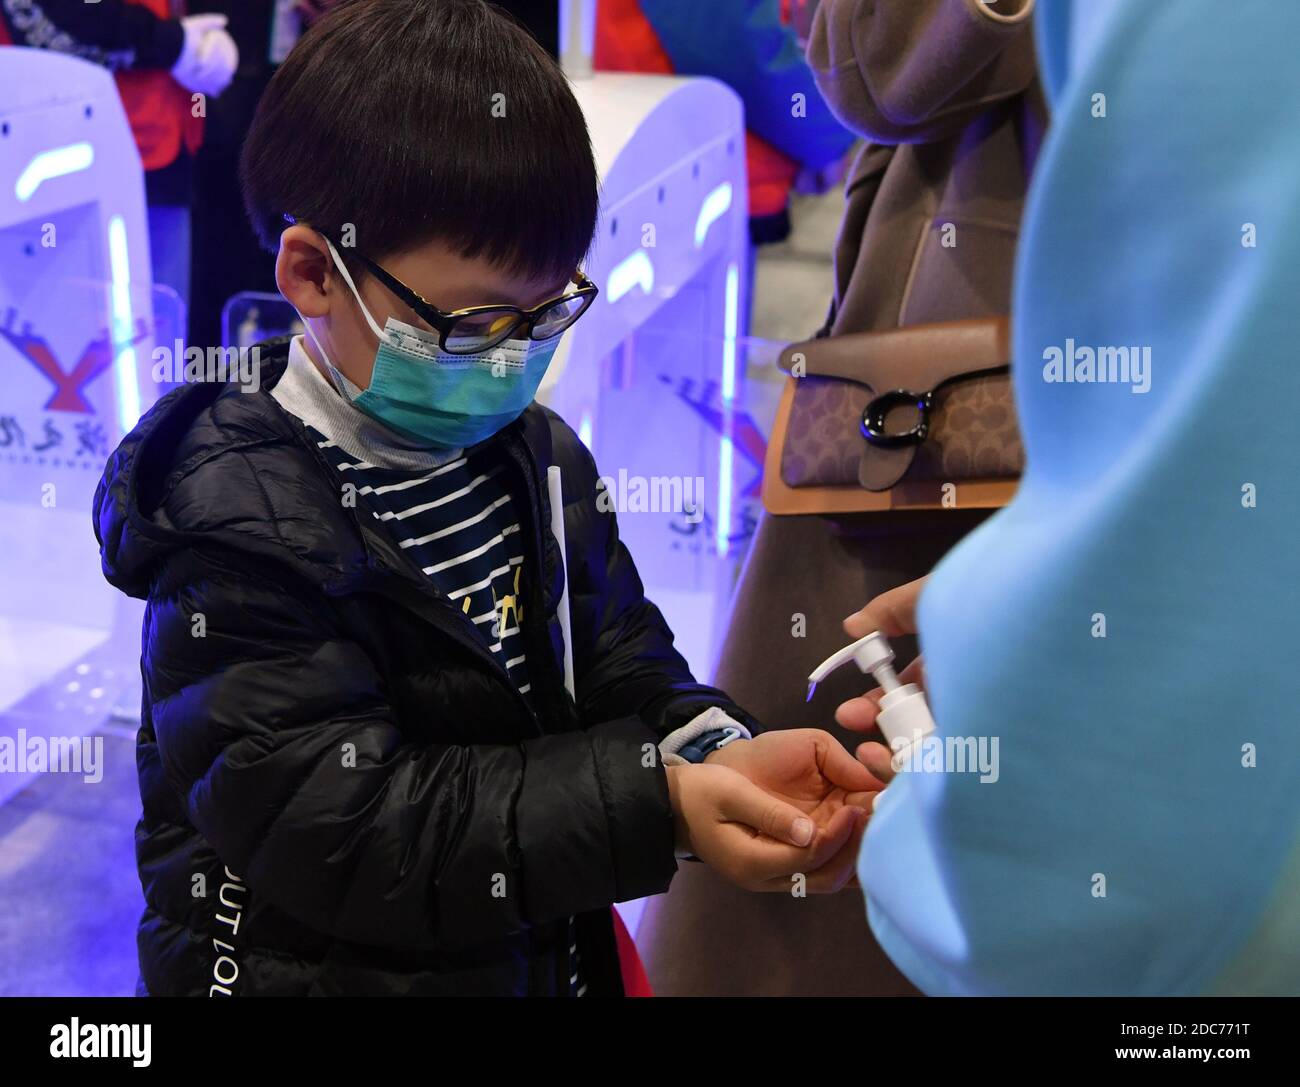 Zhengzhou, China's Henan Province. 19th Nov, 2020. A boy gets hand-cleansing gel at 2020 ITTF finals in Zhengzhou, capital of central China's Henan Province, Nov. 19, 2020. Since the COVID-19 pandemic outbreak, the 2020 ITTF Finals is the first international tournament staged in China with fans in attendance. Credit: Li Jianan/Xinhua/Alamy Live News Stock Photo